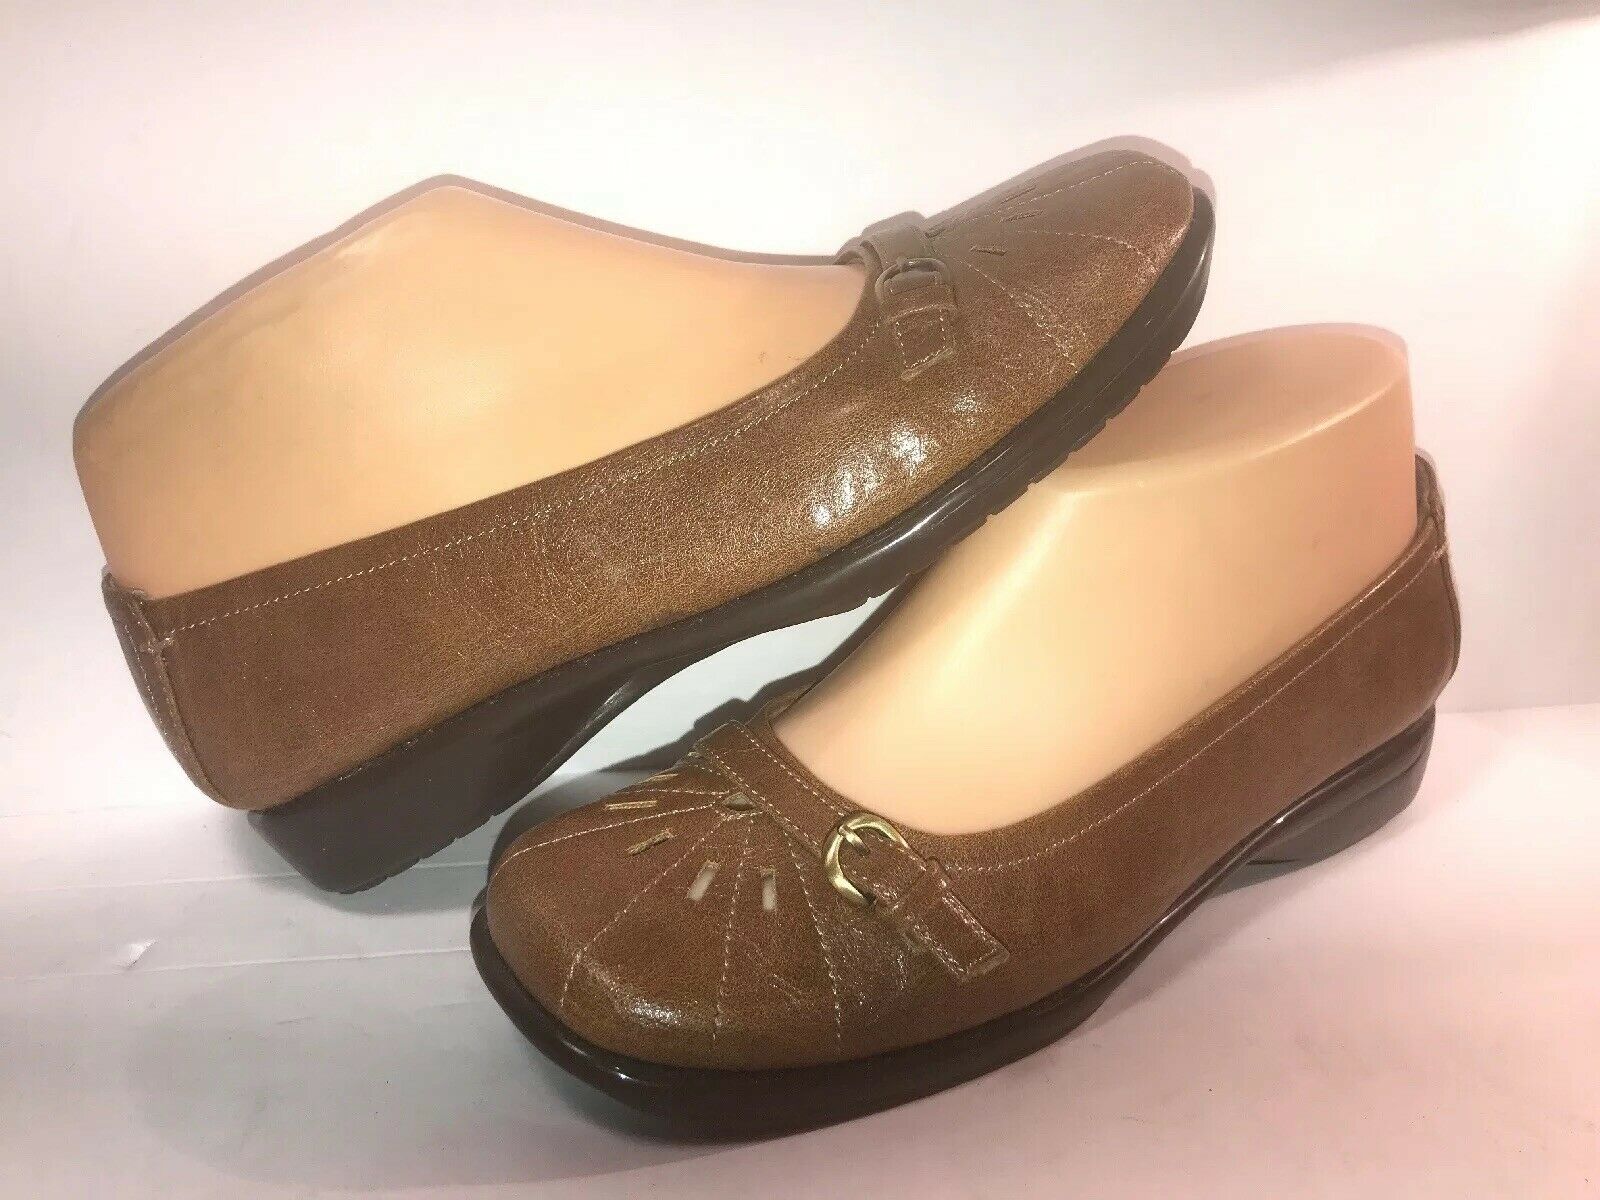 A2 AEROSOLES SZ 6 BROWN Leather Buckle SLIP ON MARY JANE WOMEN FLATS SHOES HR-2